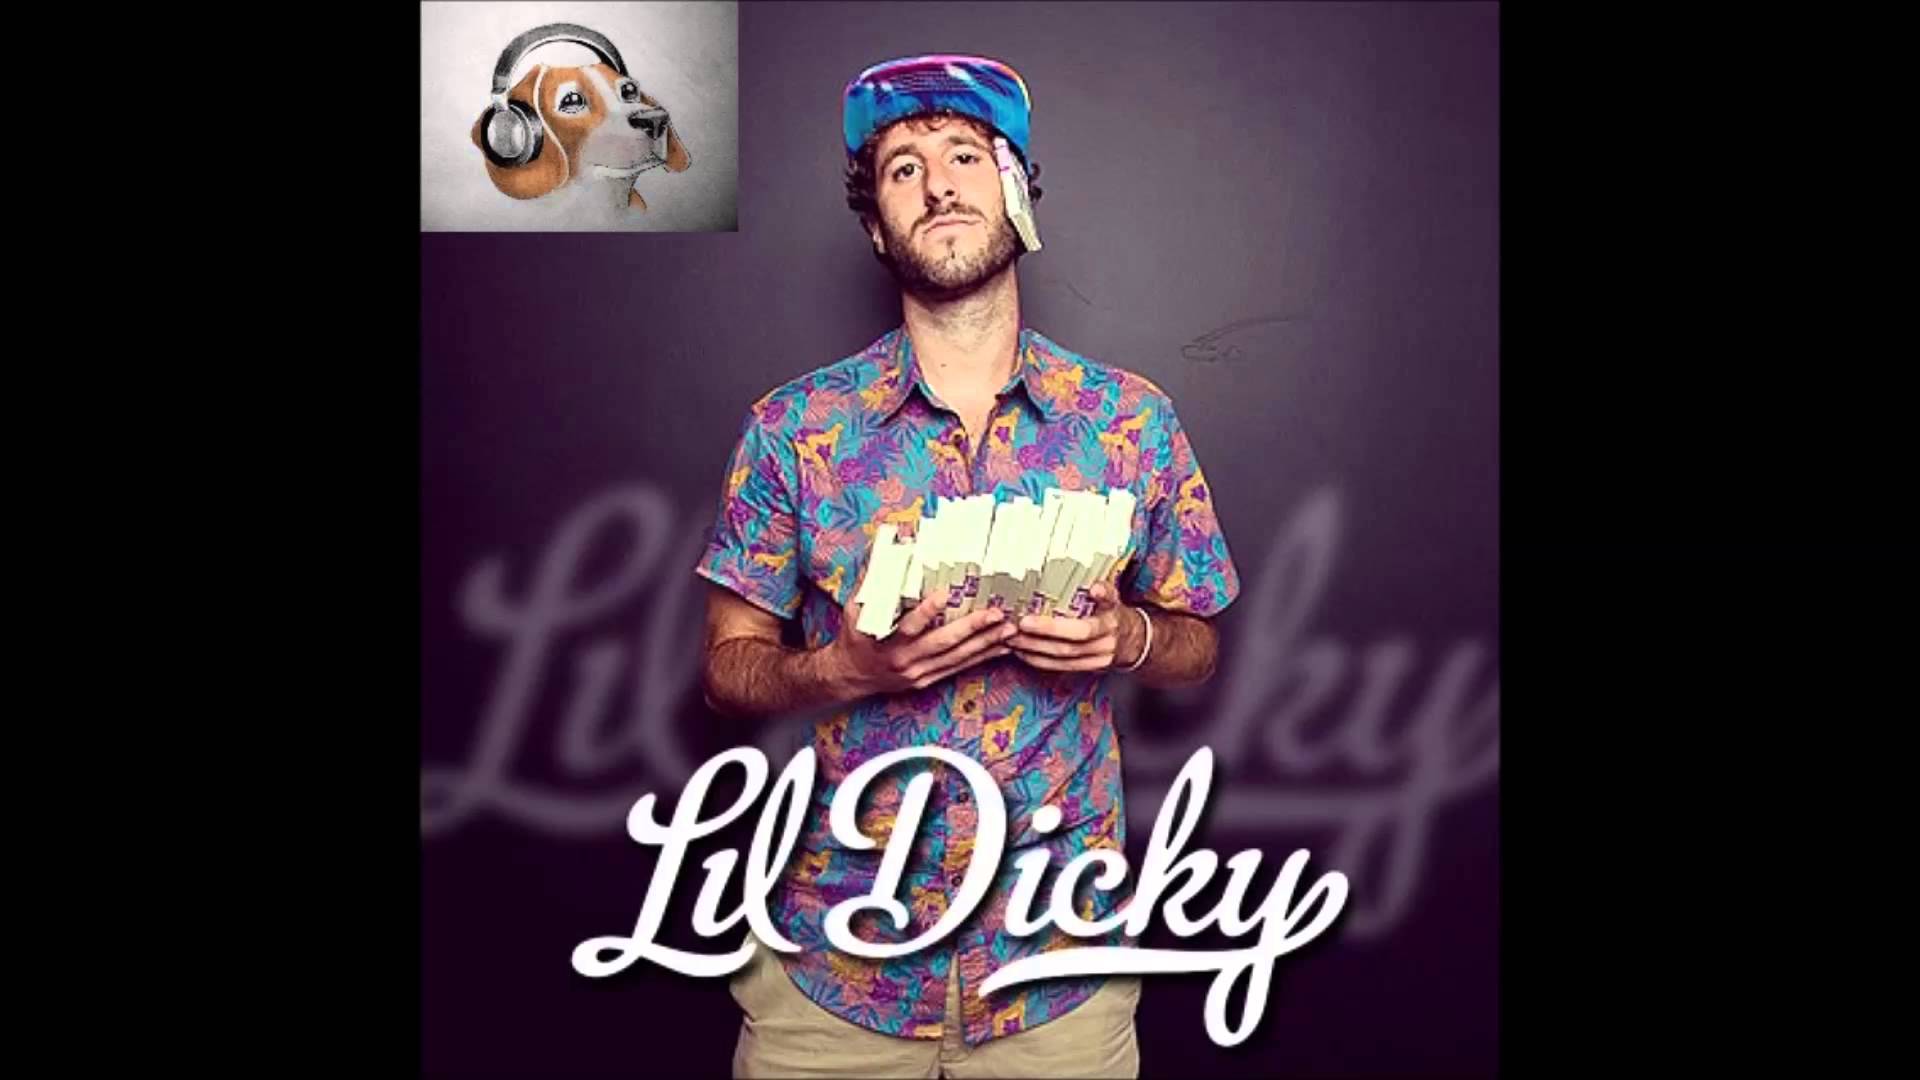 Lil Dicky - $ave Dat Money Ft. Fetty Wap and Rich Homie Quan